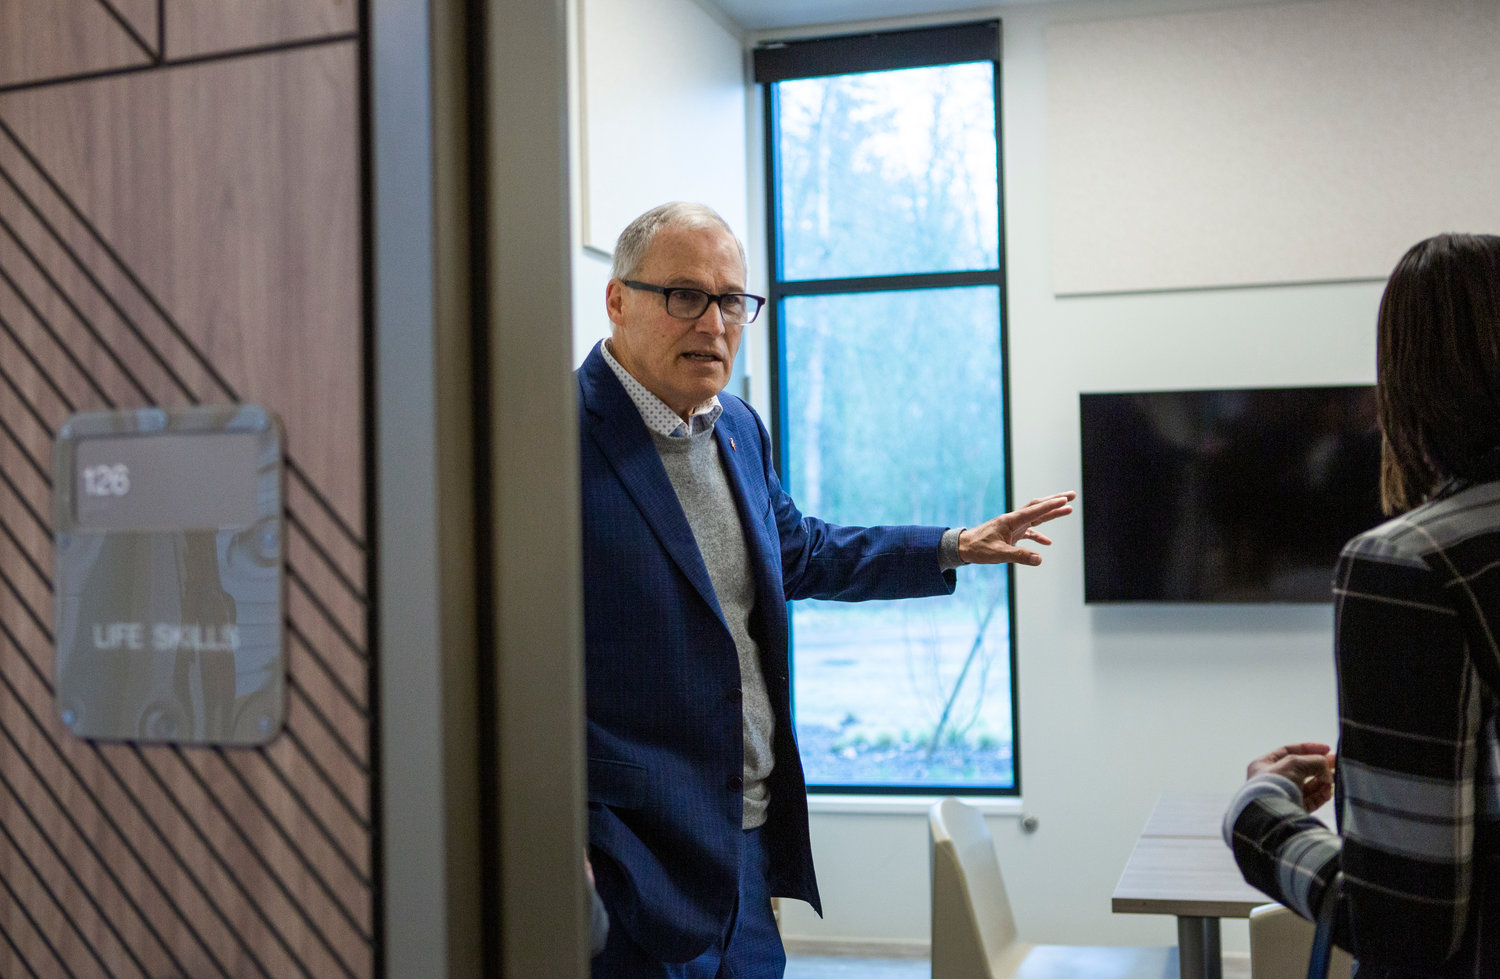 Gov. Jay Inslee tours classrooms inside the new Civil Center for Behavioral Health at Maple Lane School between Centralia and Rochester during a grand opening ceremony on Friday, Jan. 27.